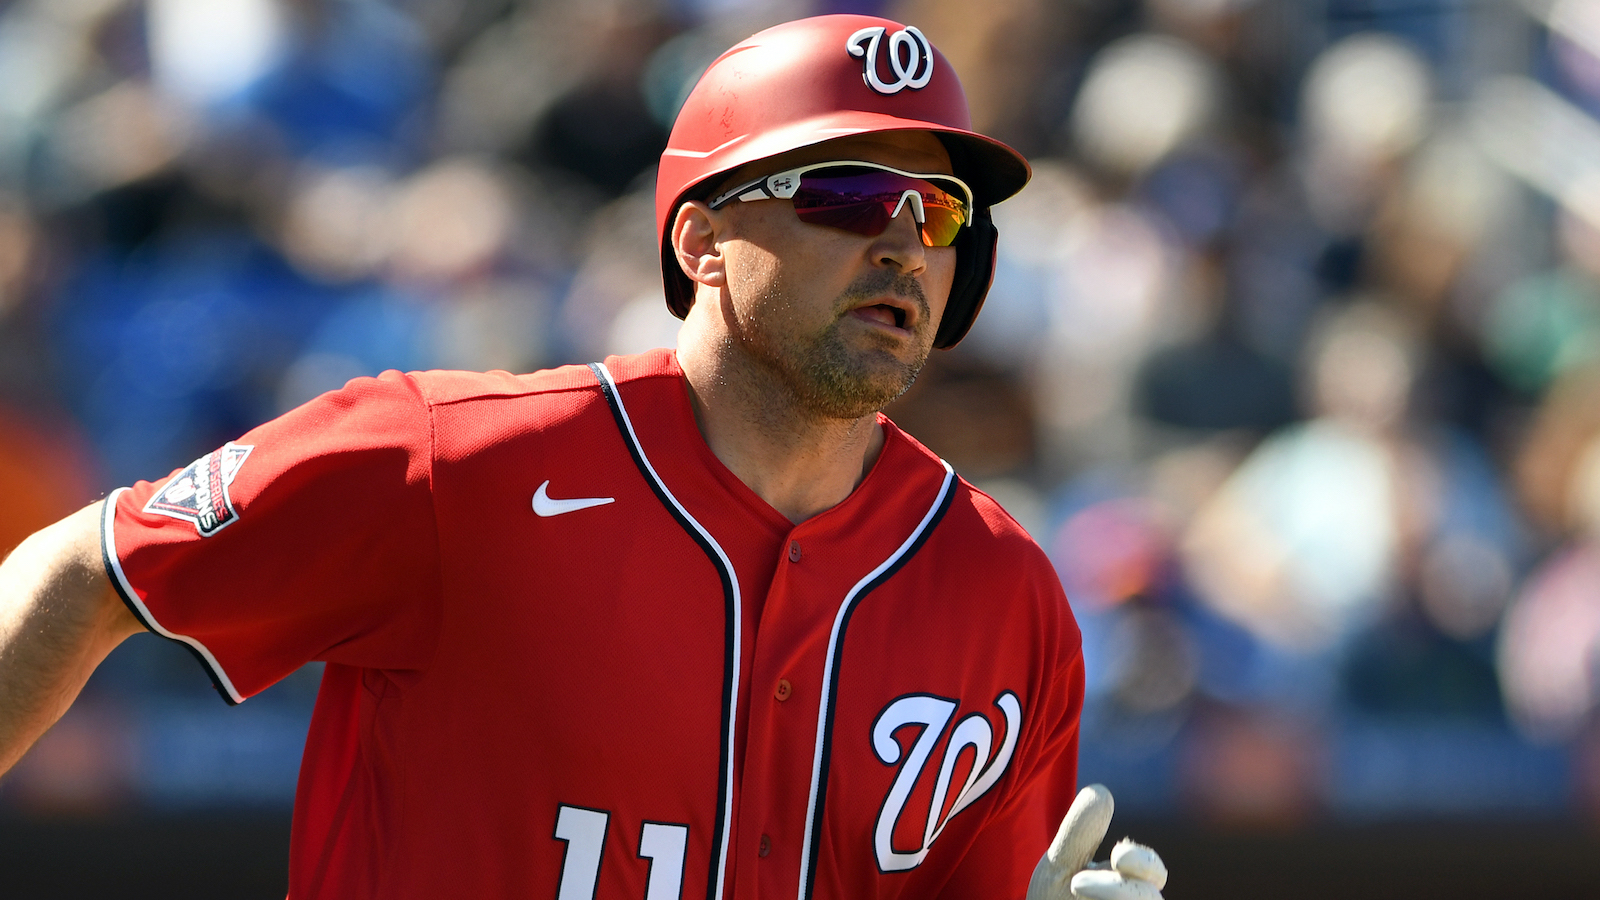 From the very beginning': Nationals retire Zimmerman's 11 - The